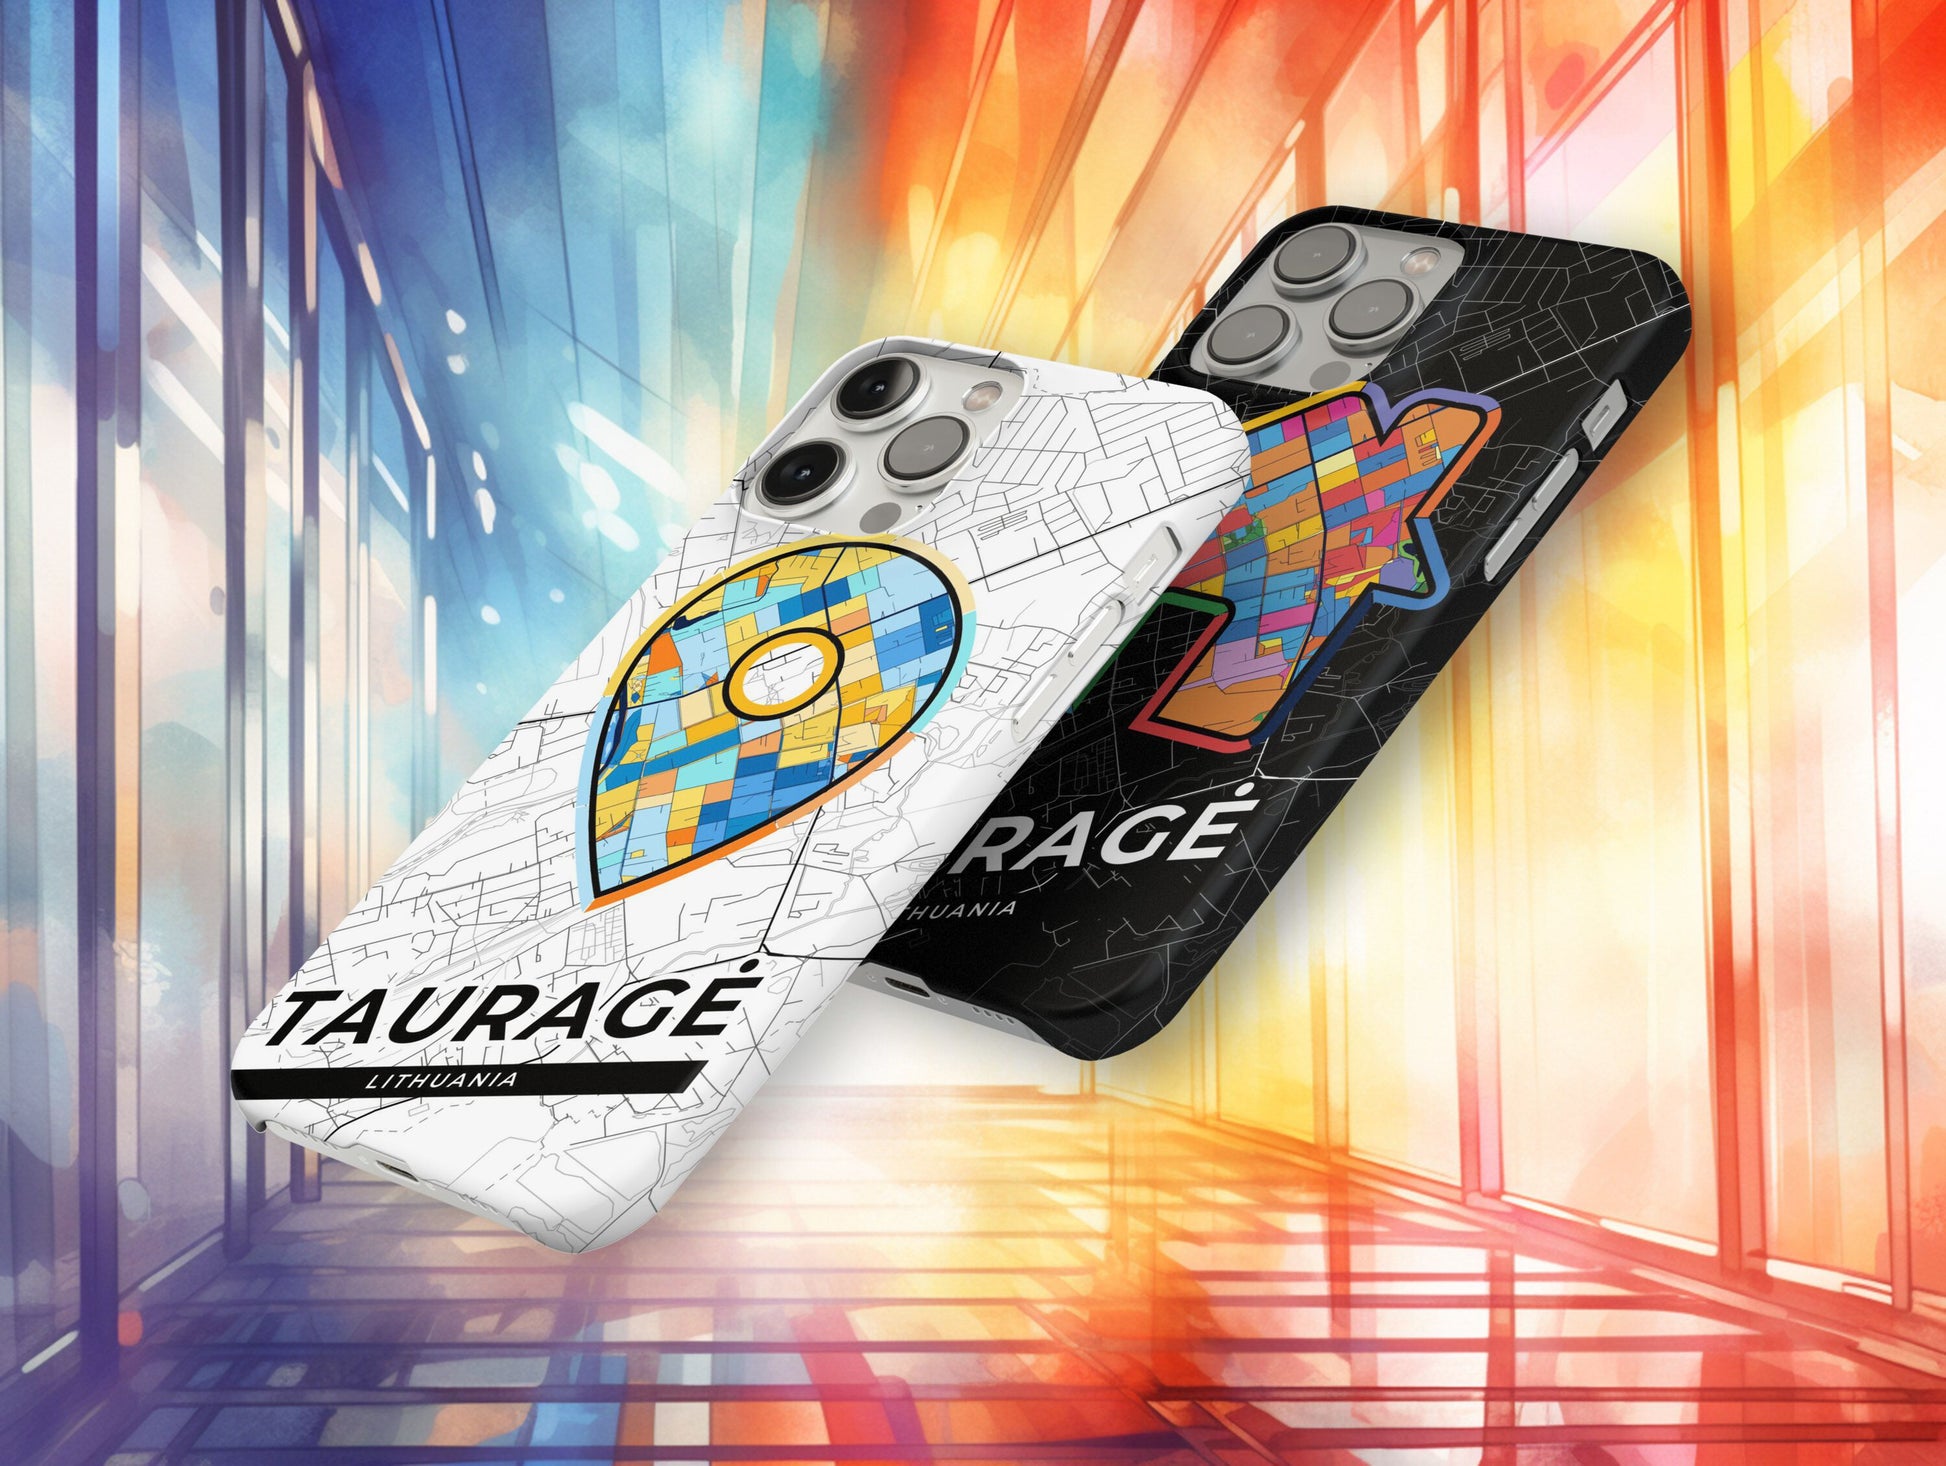 Tauragė Lithuania slim phone case with colorful icon